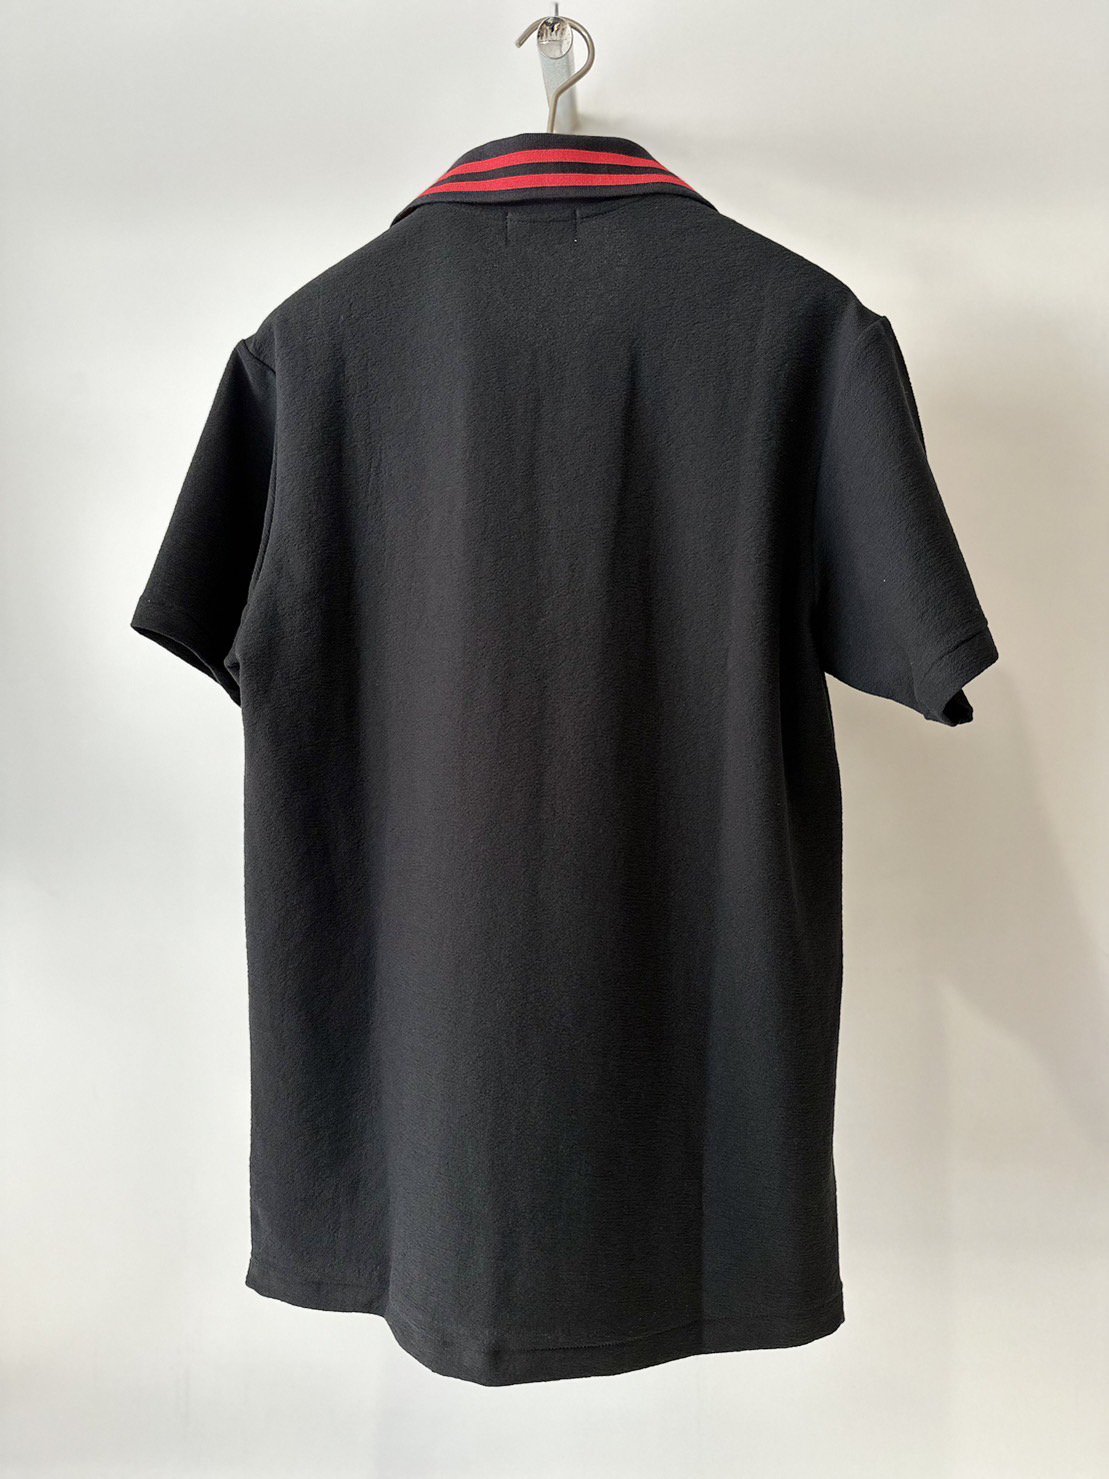 LITTLEBIG<br />S/S Lace-Up Polo SH / Black<img class='new_mark_img2' src='https://img.shop-pro.jp/img/new/icons14.gif' style='border:none;display:inline;margin:0px;padding:0px;width:auto;' />